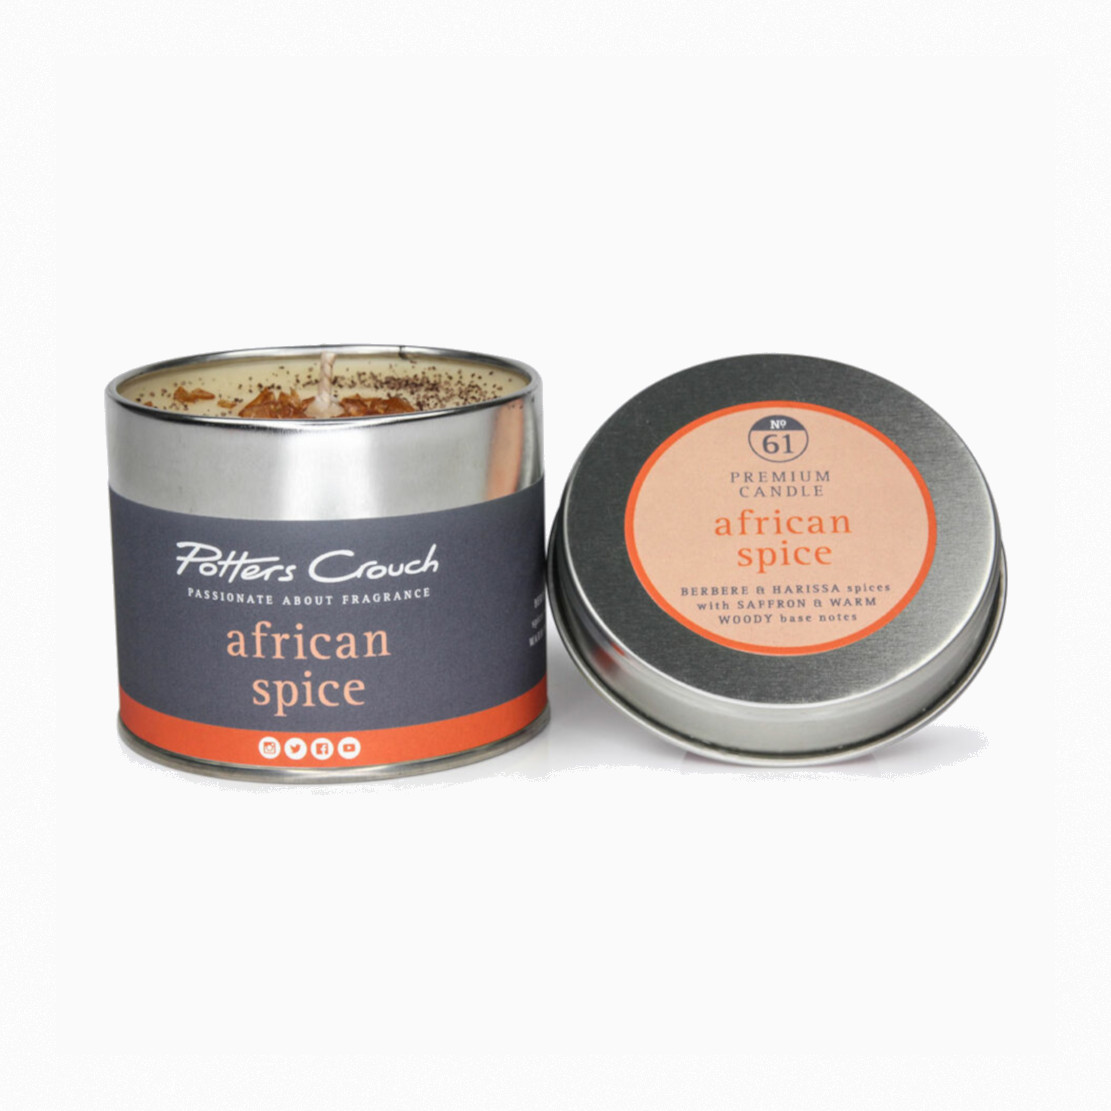 Potters Crouch African Spice Tin Candle